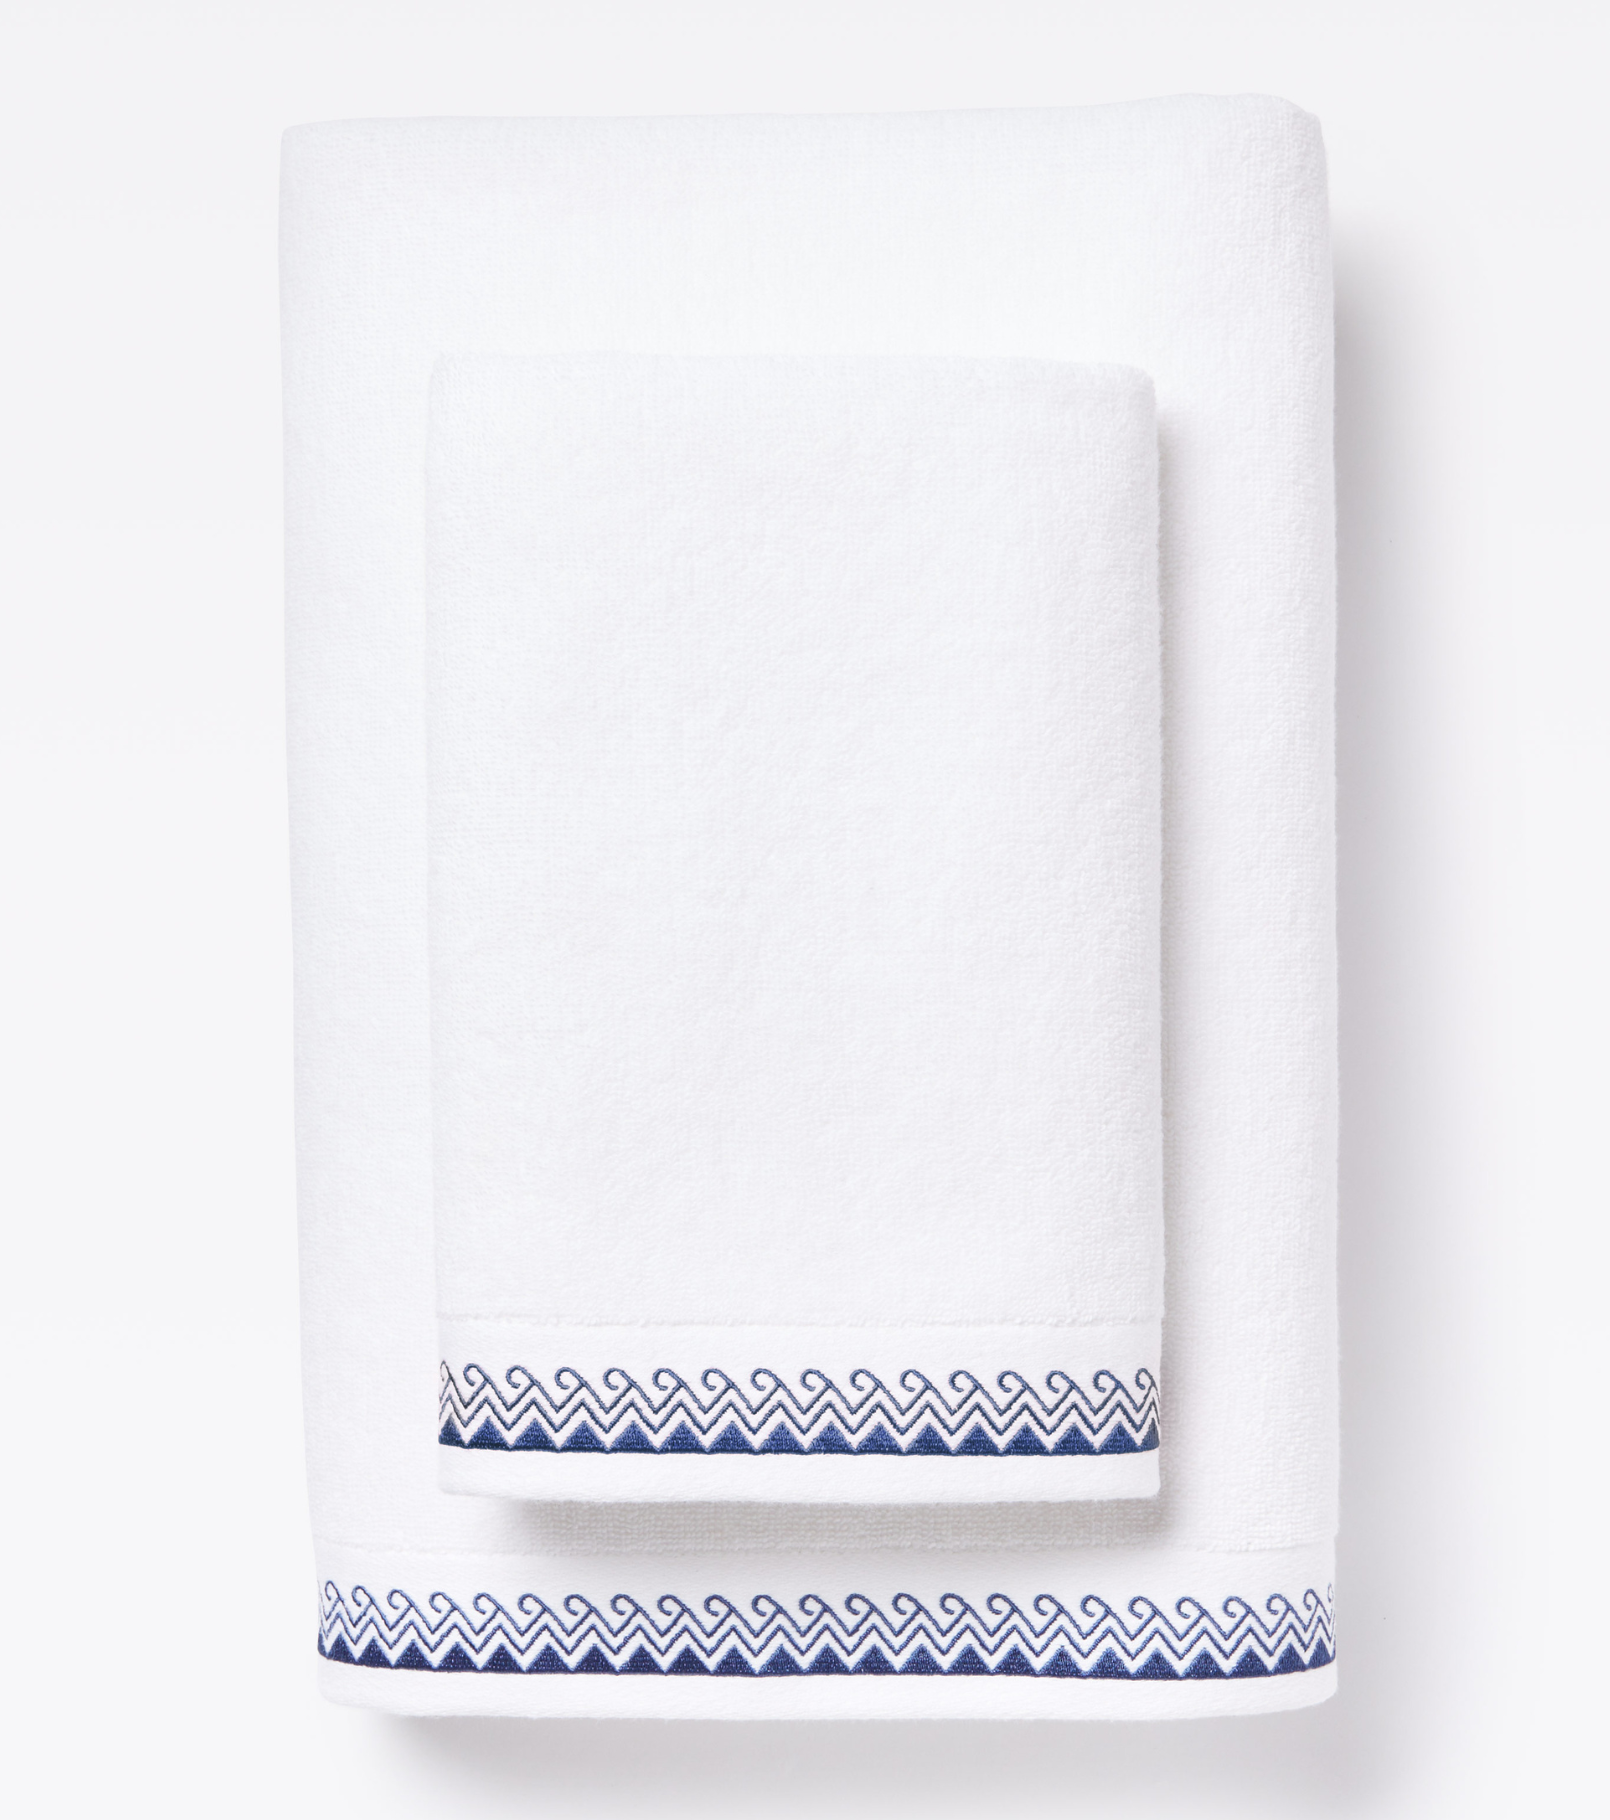 Averylily Wind + Wave Bath and Hand Towels in White with Ocean Blue trim, made from 600-gram weight pure Aegean cotton.